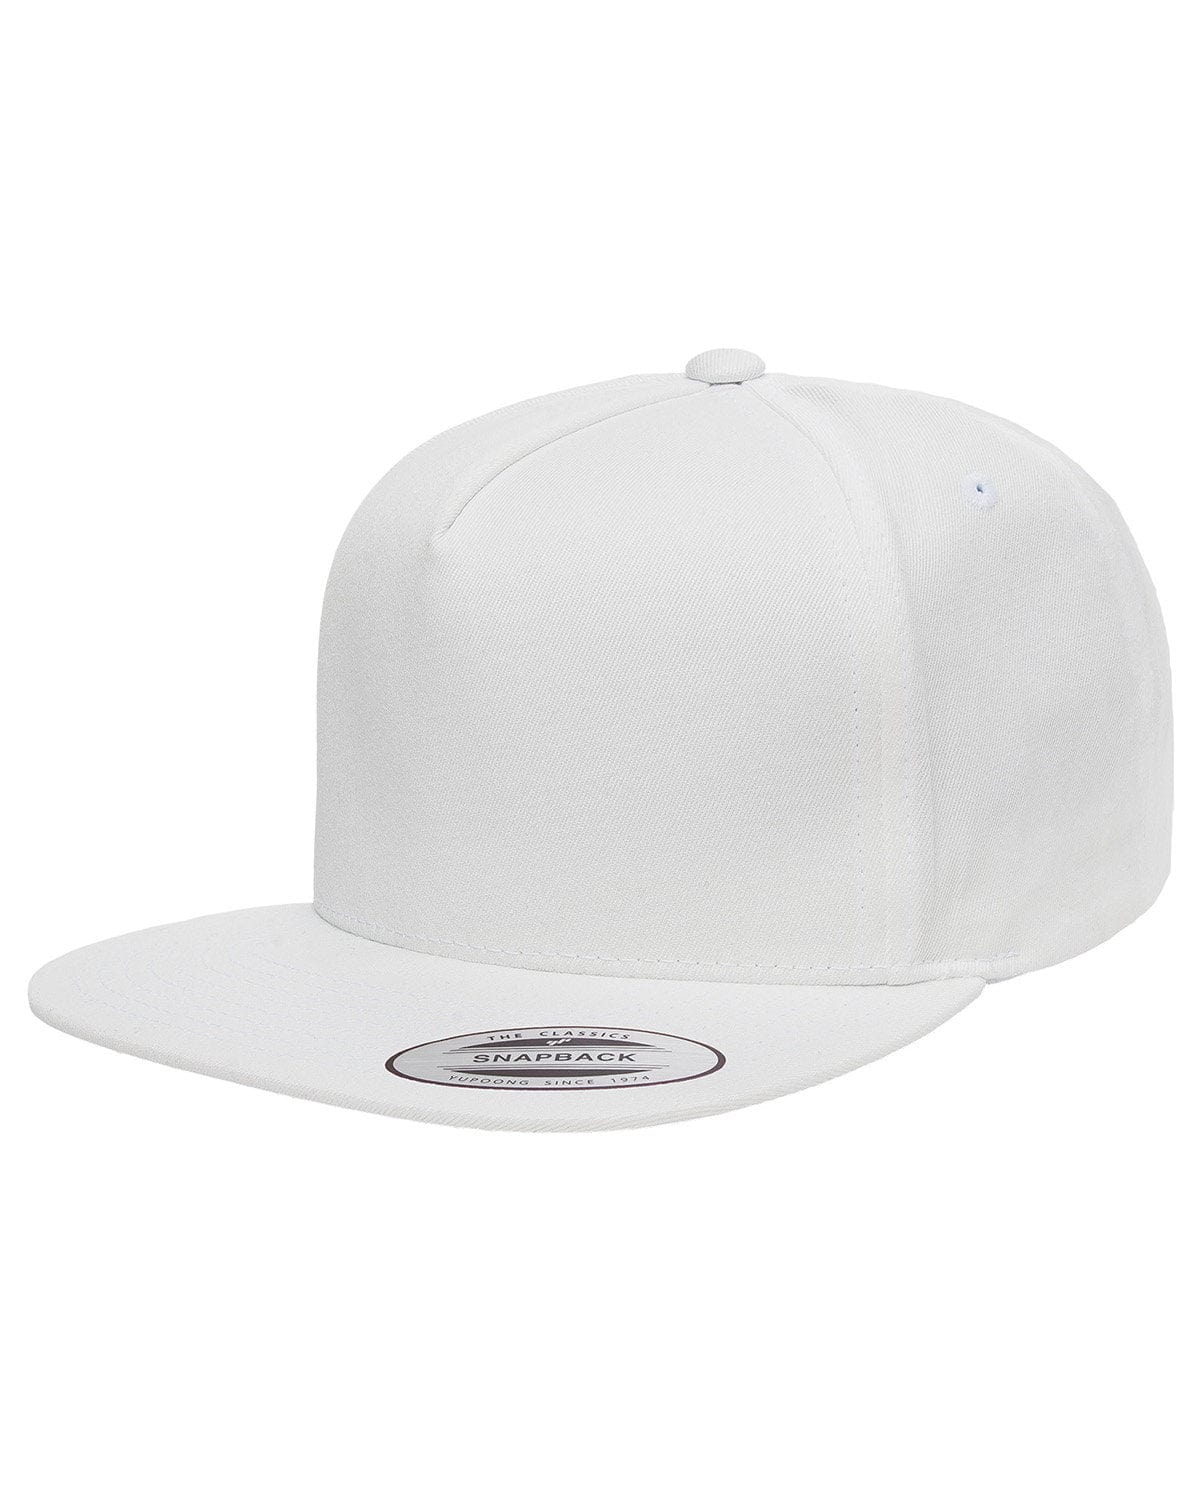 Yupoong Y6007: Adult 5-Panel Cotton Twill Snapback Cap